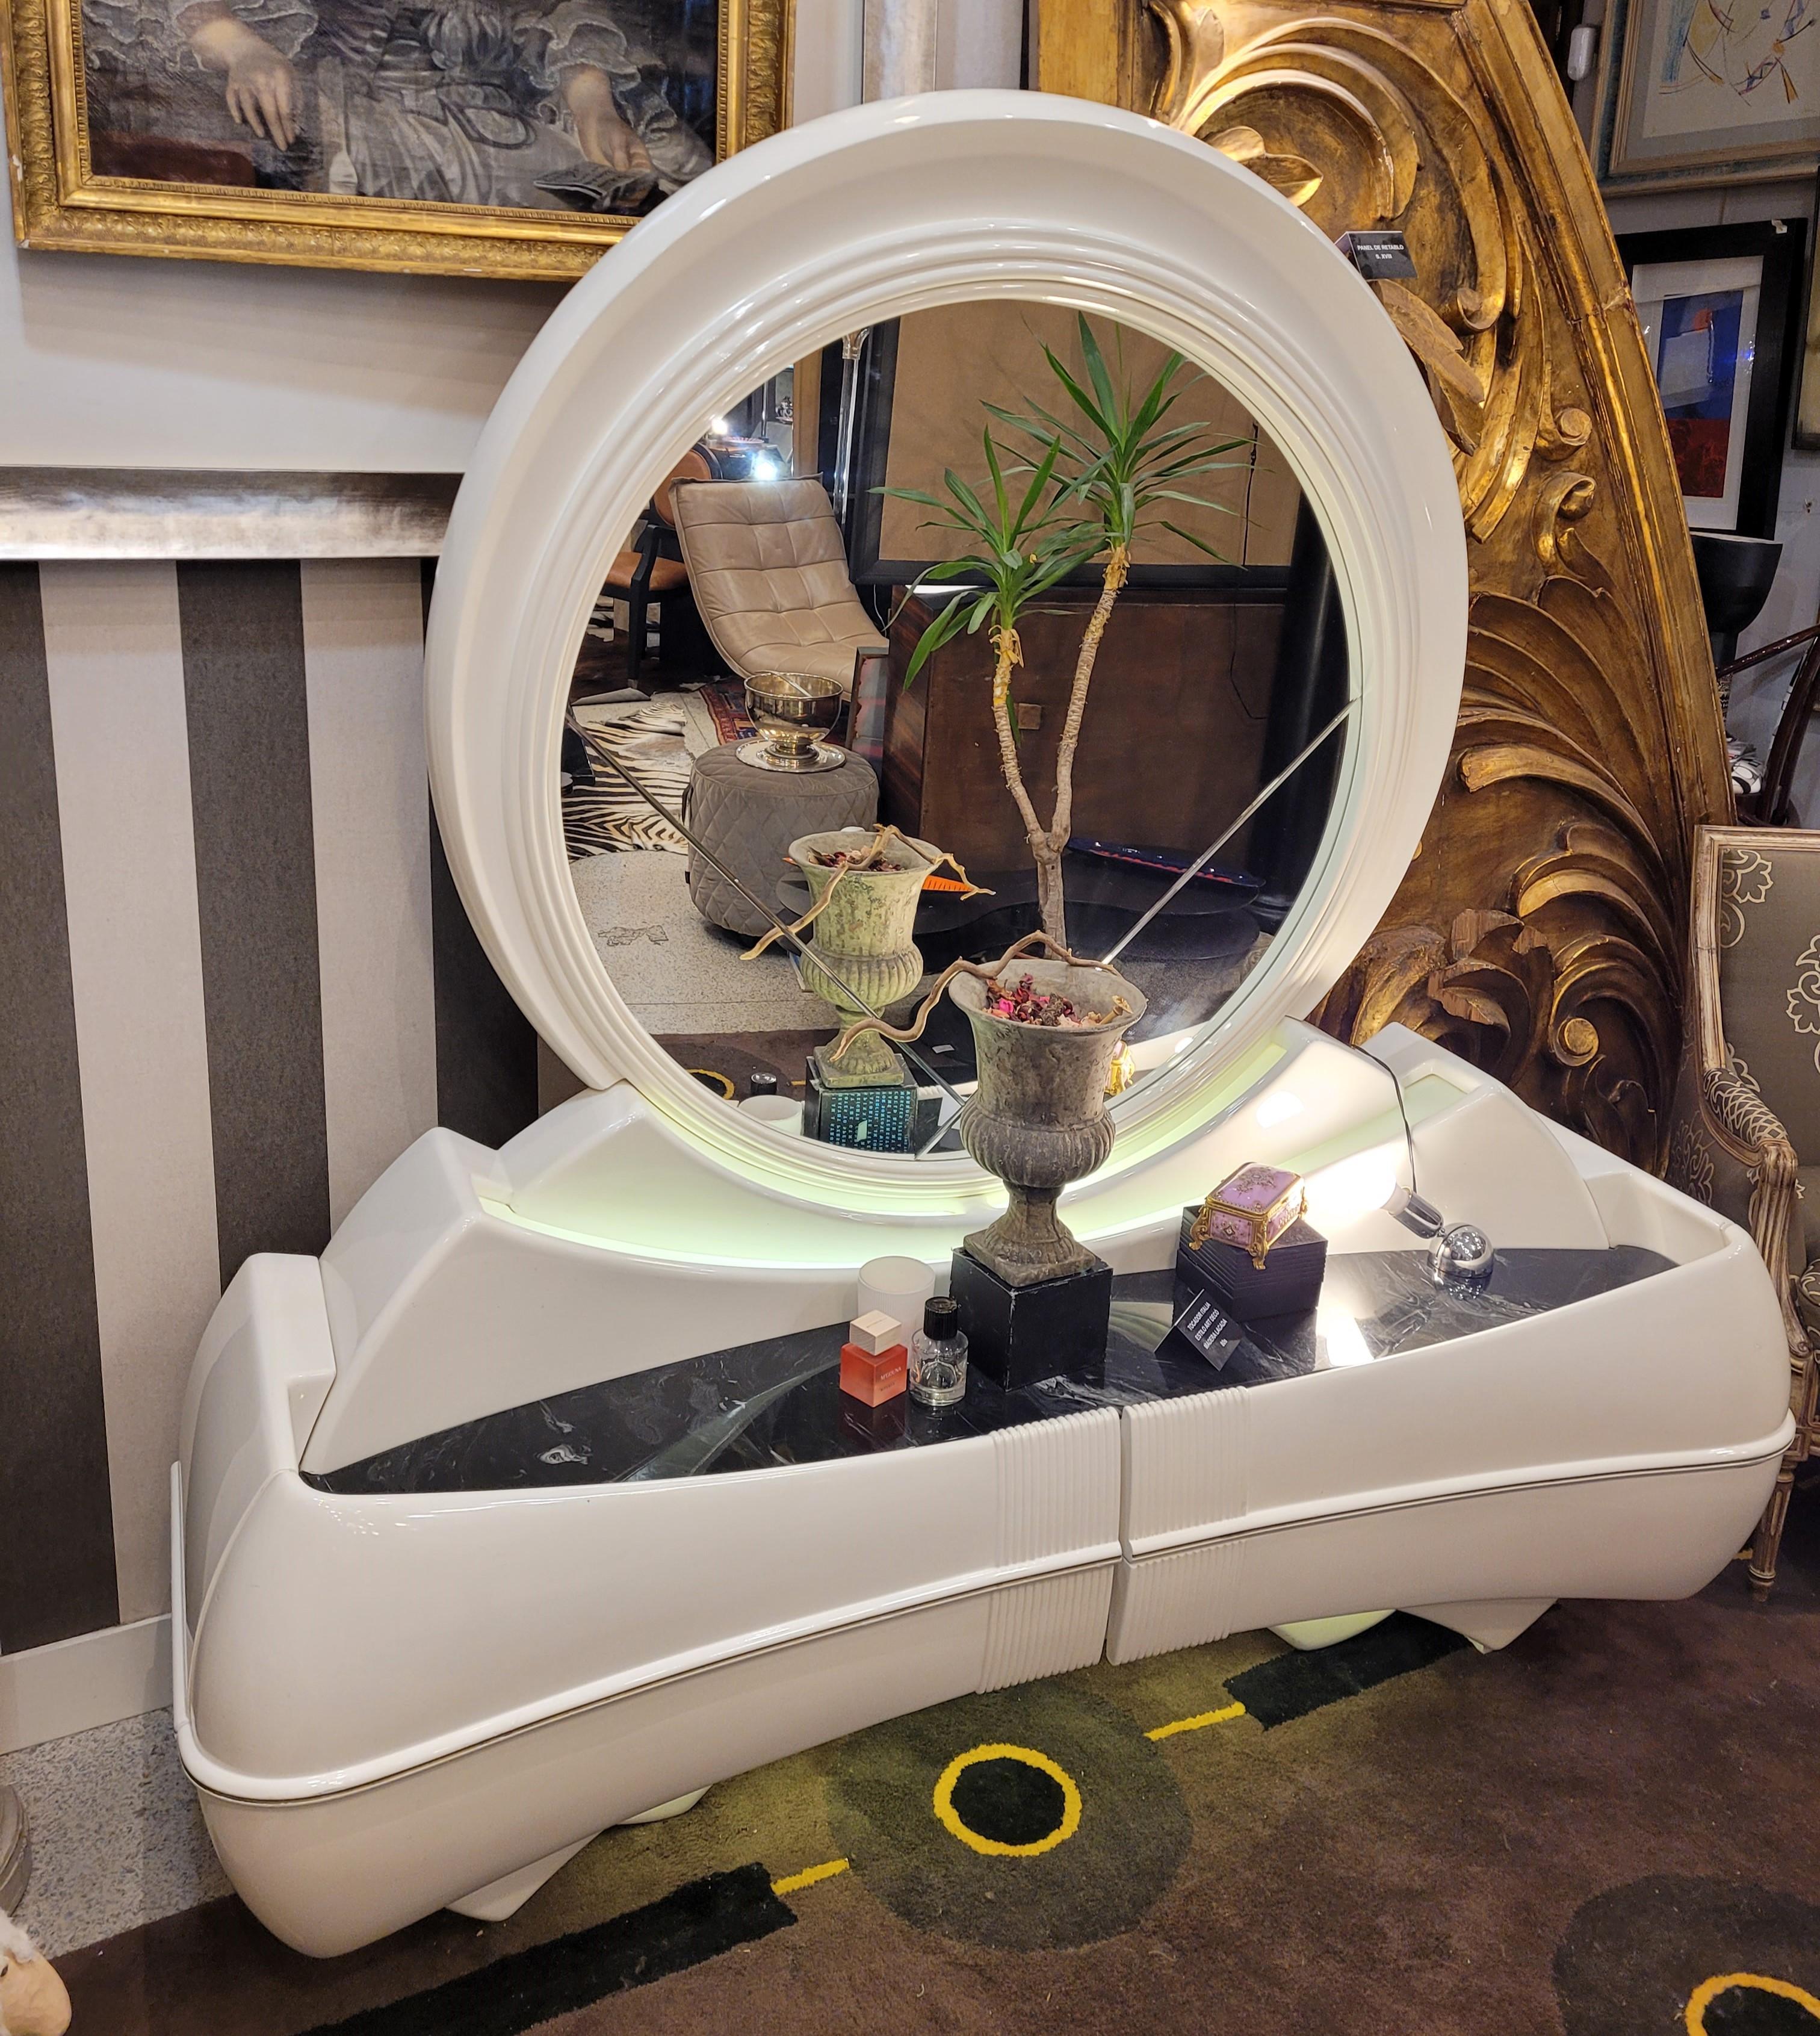 One of a kind dressing table, space age style, 70s, with great influence of Art Deco aesthetics.
In white lacquered wood, with a black marble effect fiberglass top. Large circular mirror in the upper part and the storage part is divided into two